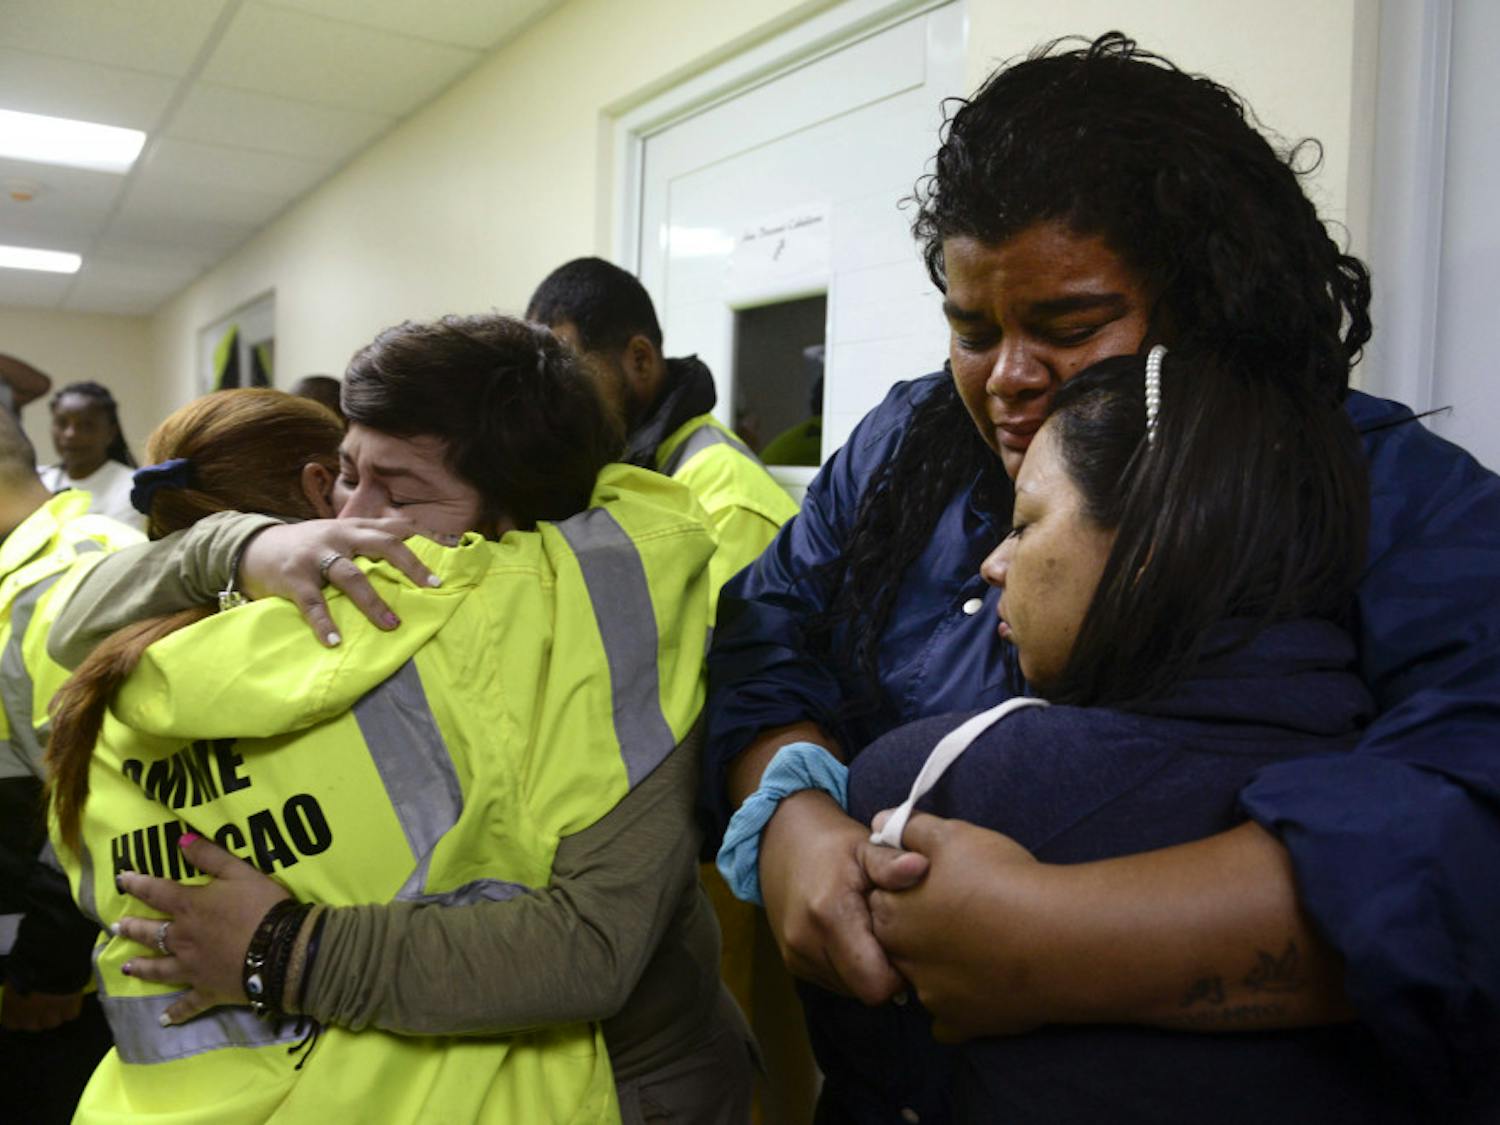 From left: Rescue team members Candida Lozada, Stephanie Rivera, Mary Rodriguez and Zuly Ruiz embrace as they wait to assist in the aftermath of Hurricane Maria in Humacao, Puerto Rico, on Wednesday.